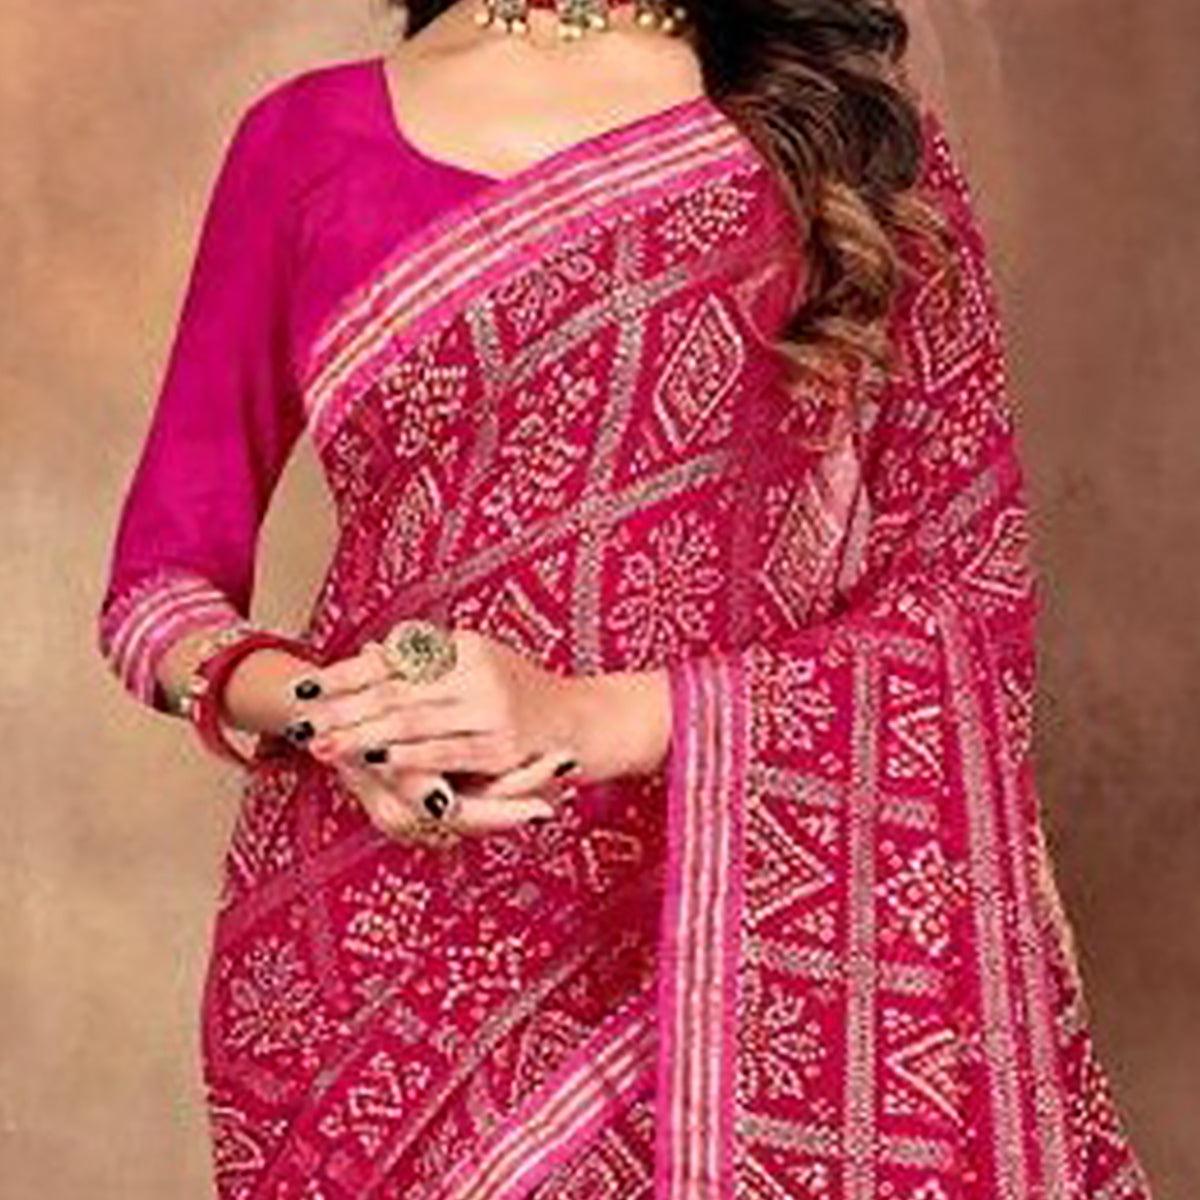 Jazzy Pink Colored Festive Wear Bandhani Print With Gotta Border Heavy Georgette Saree - Peachmode